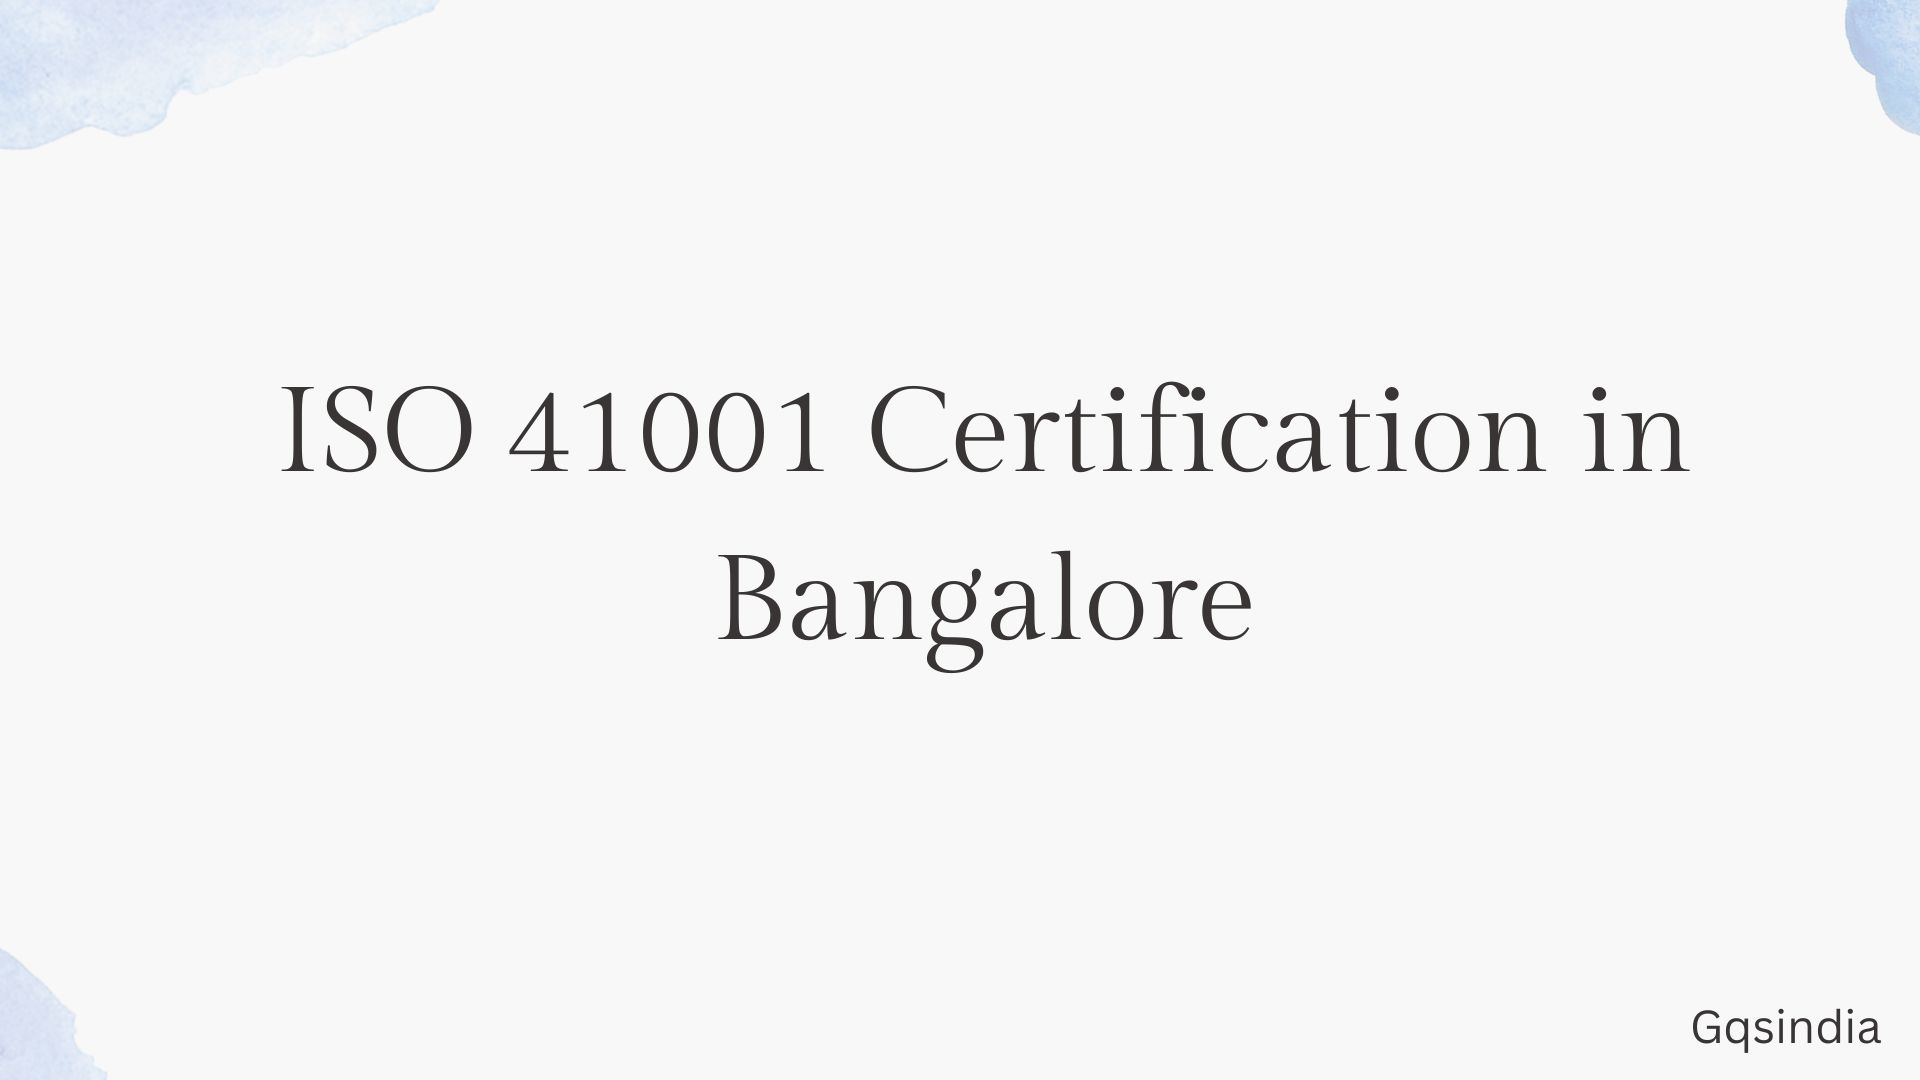 ISO 41001 Certification in Bangalore